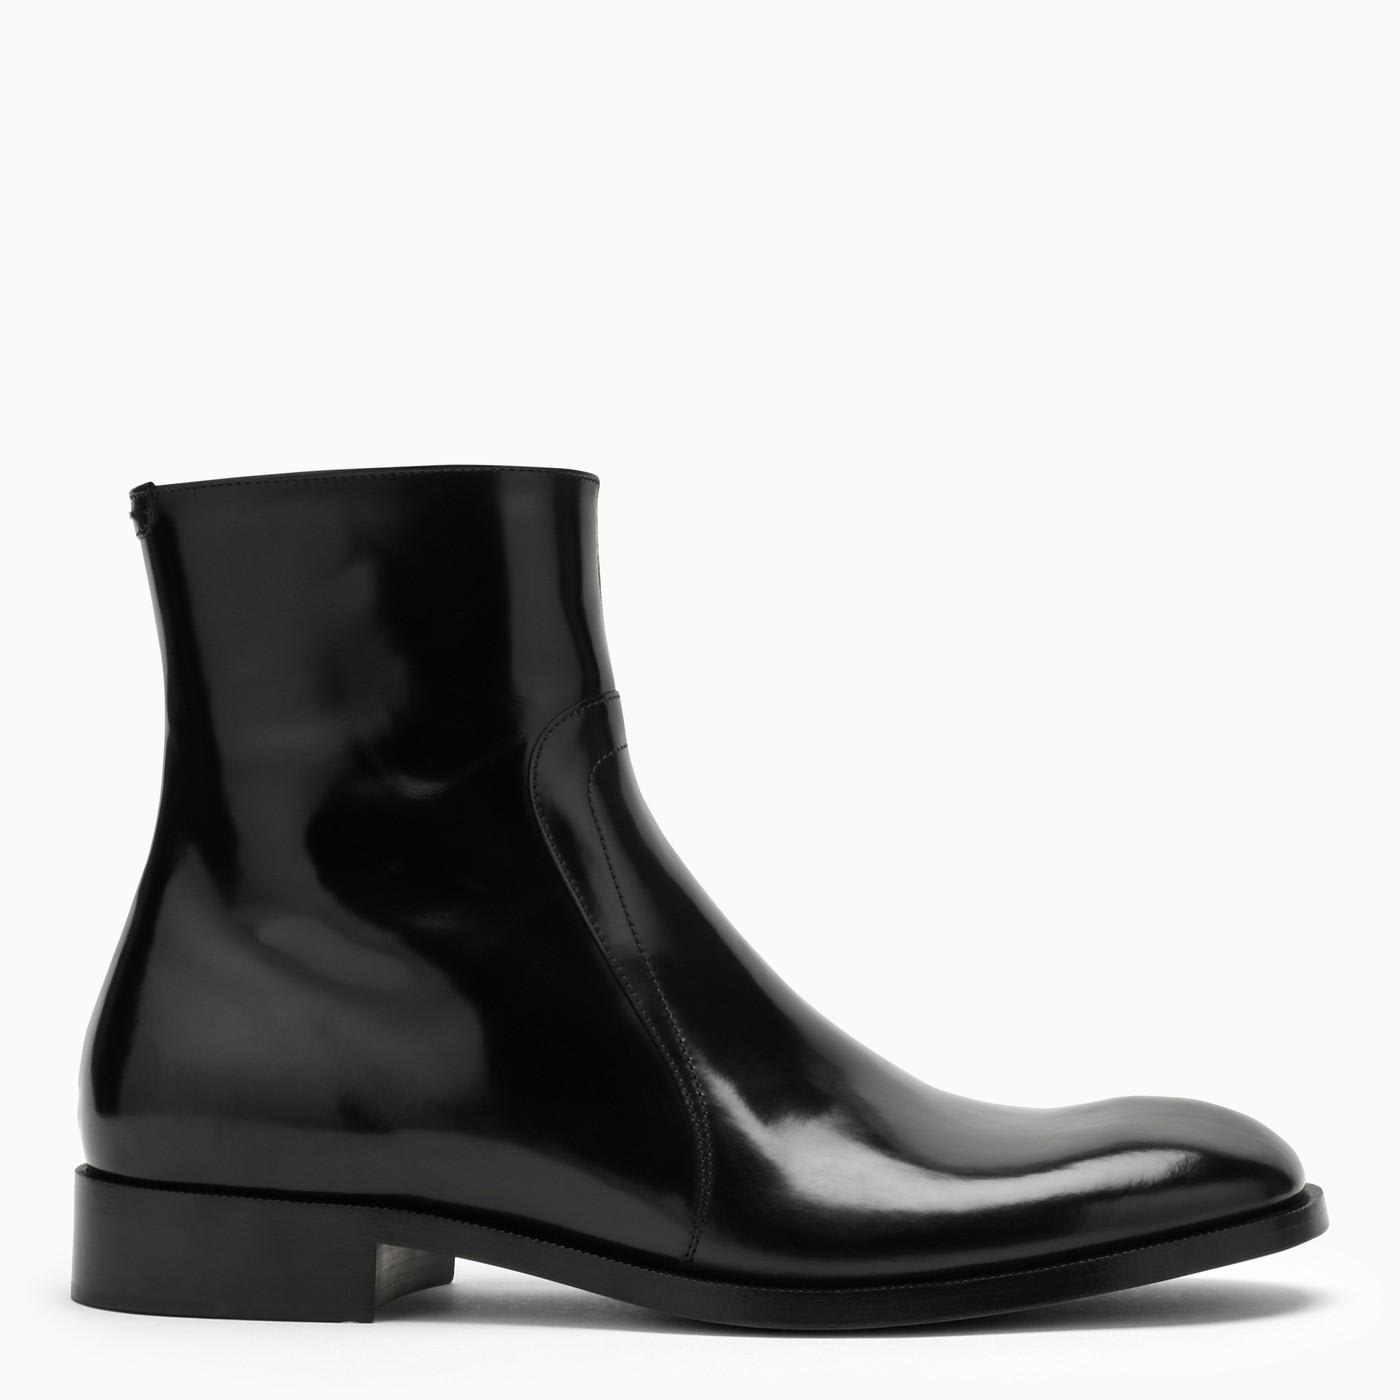 MAISON MARGIELA BLACK SMOOTH LEATHER ANKLE BOOT